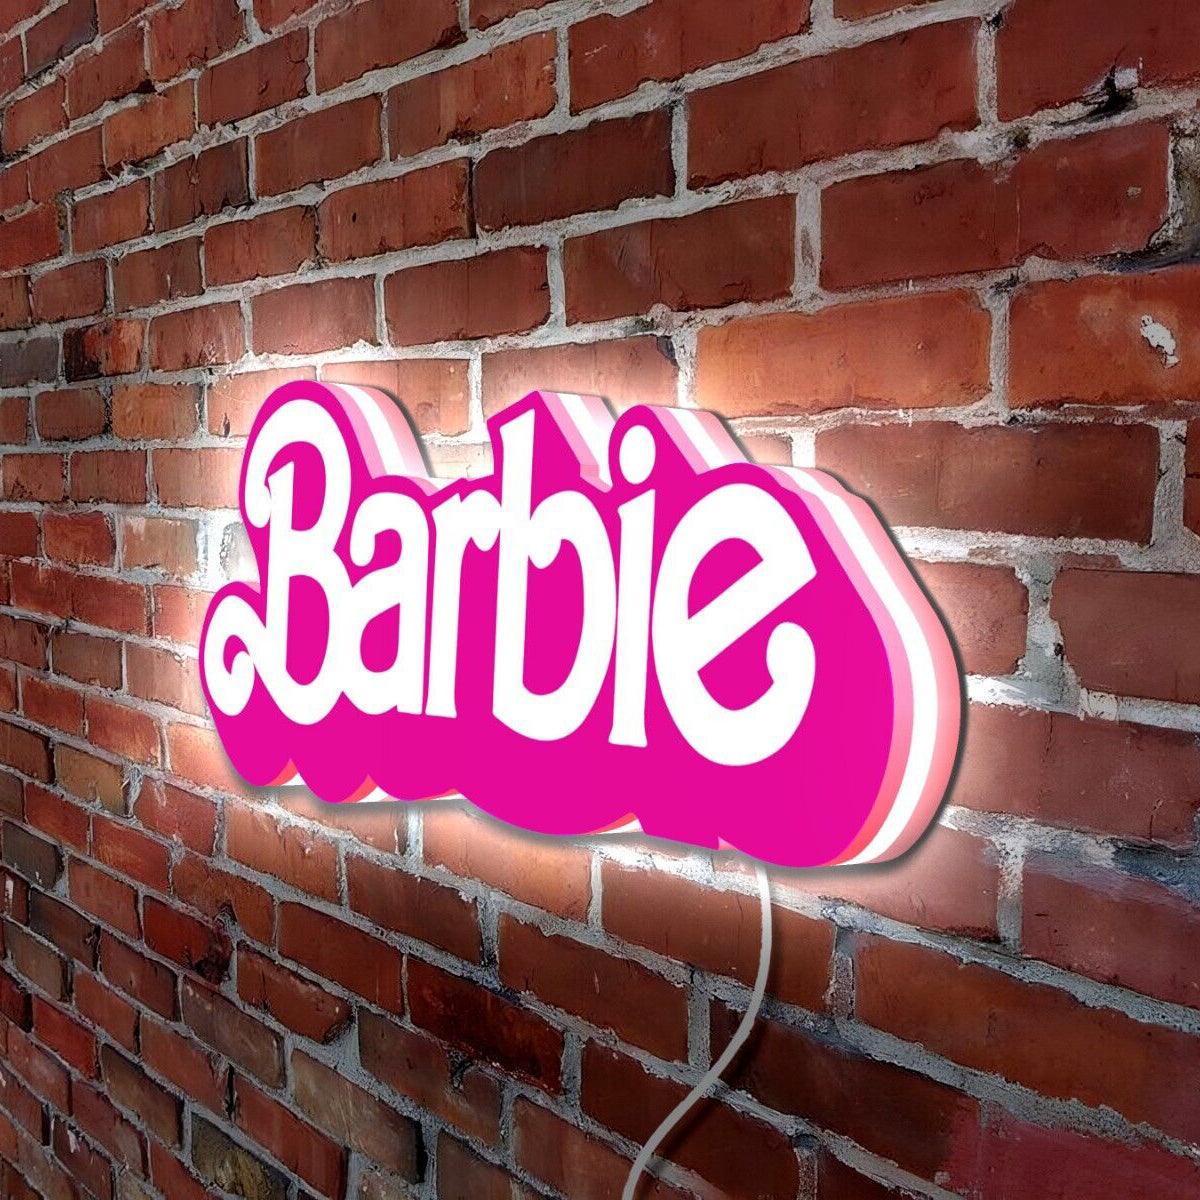 Barbie Movie Sign LED Light Box Charm and Imagination USB Powered Dimmable - FYLZGO Signs